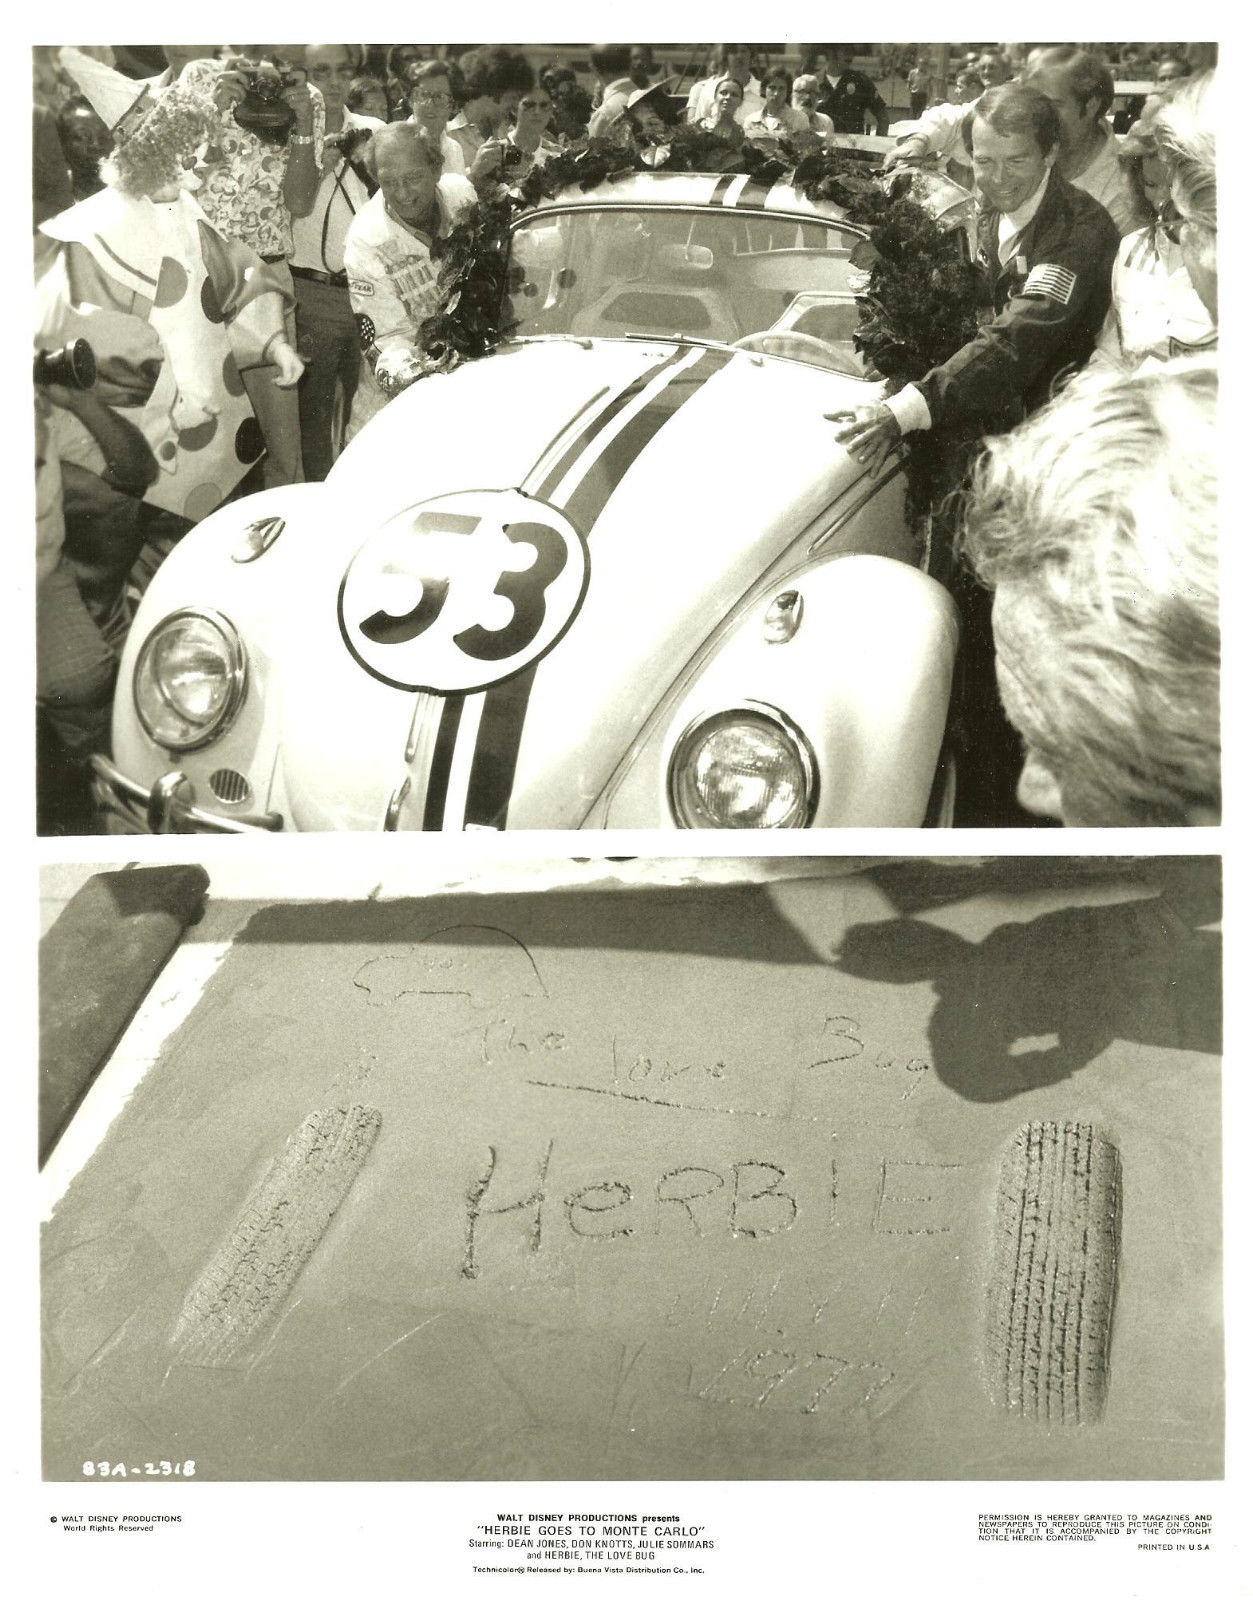 Herbie putting his "footprints" in the Hollywood Walk of Fame.